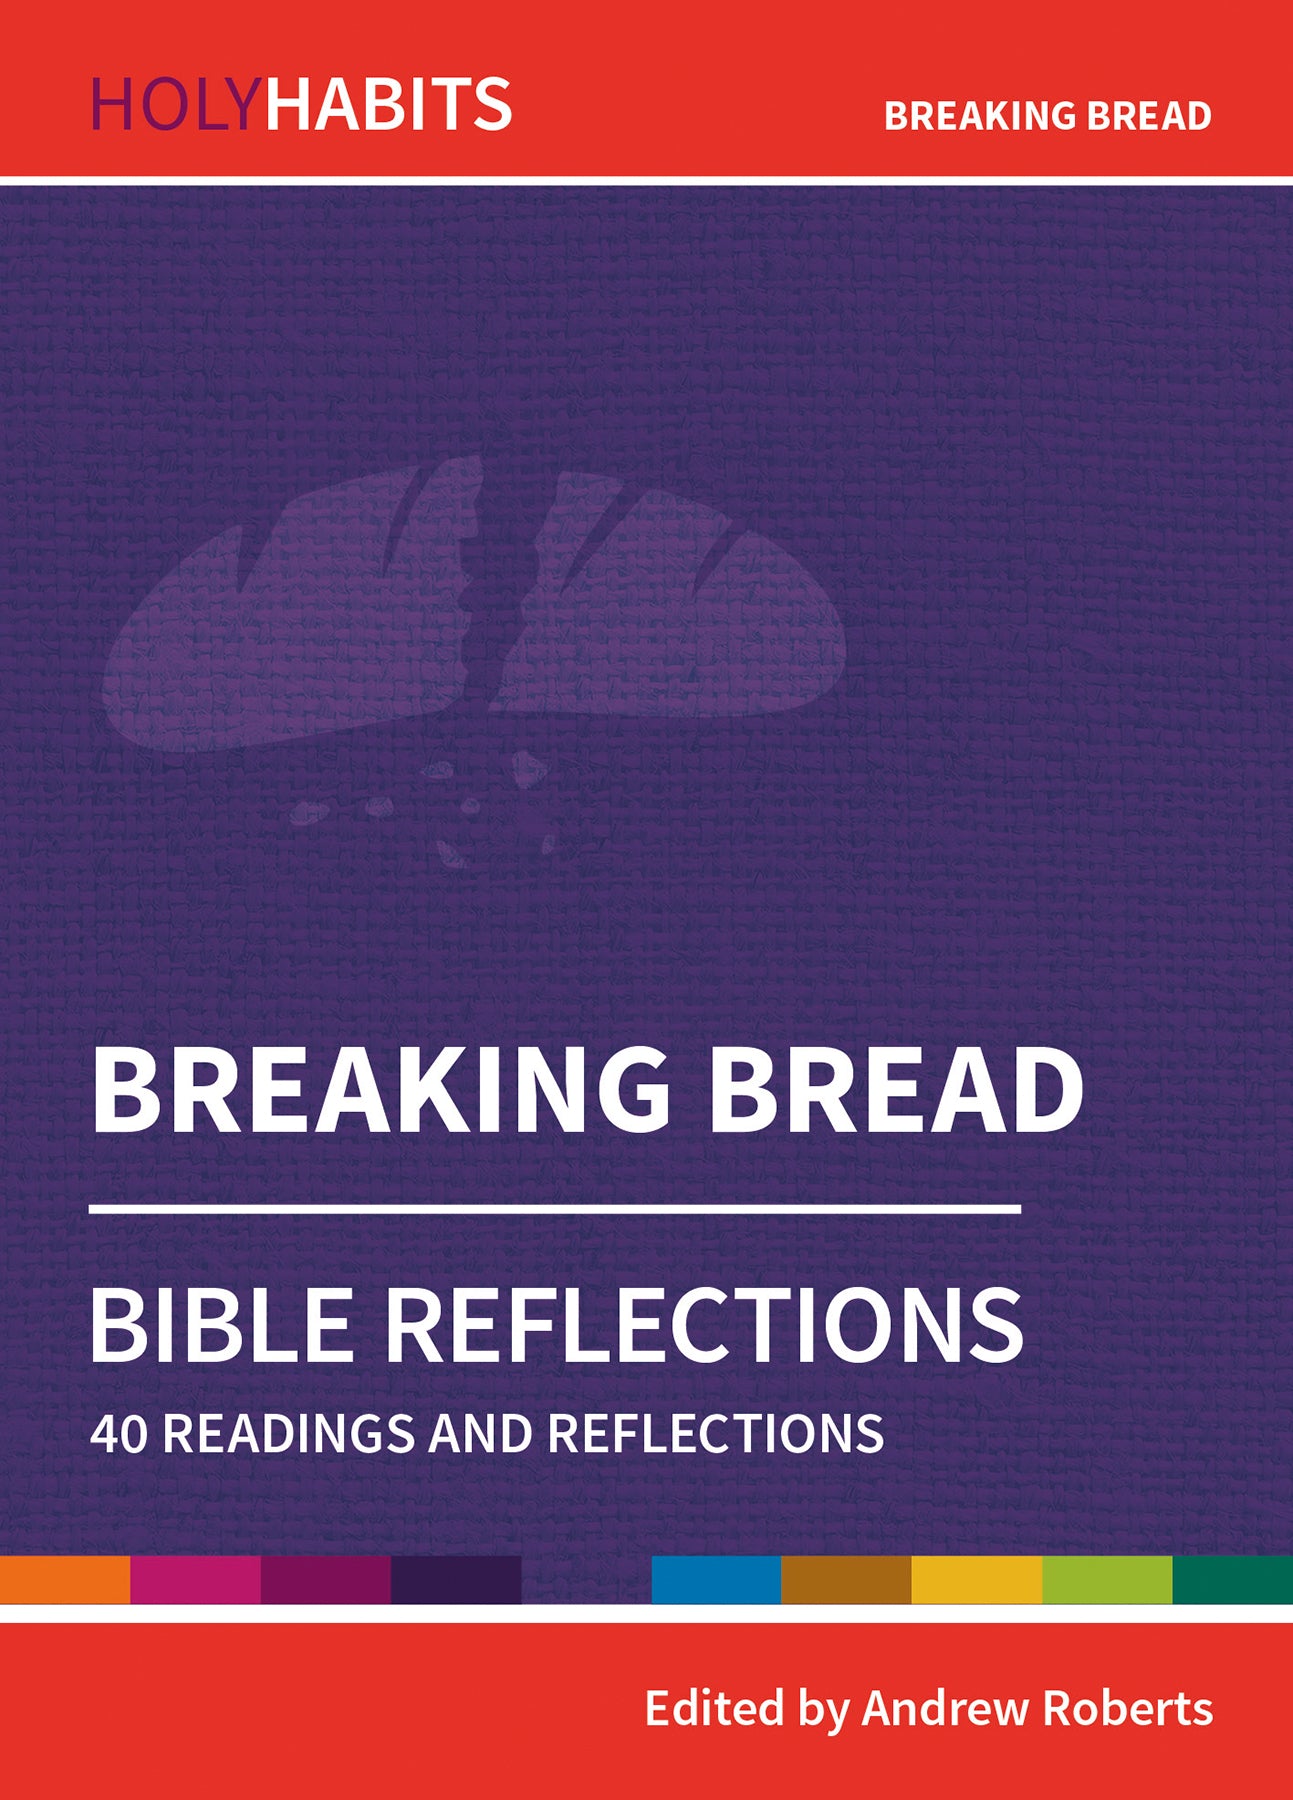 Image of Holy Habits Bible Reflections: Breaking Bread other